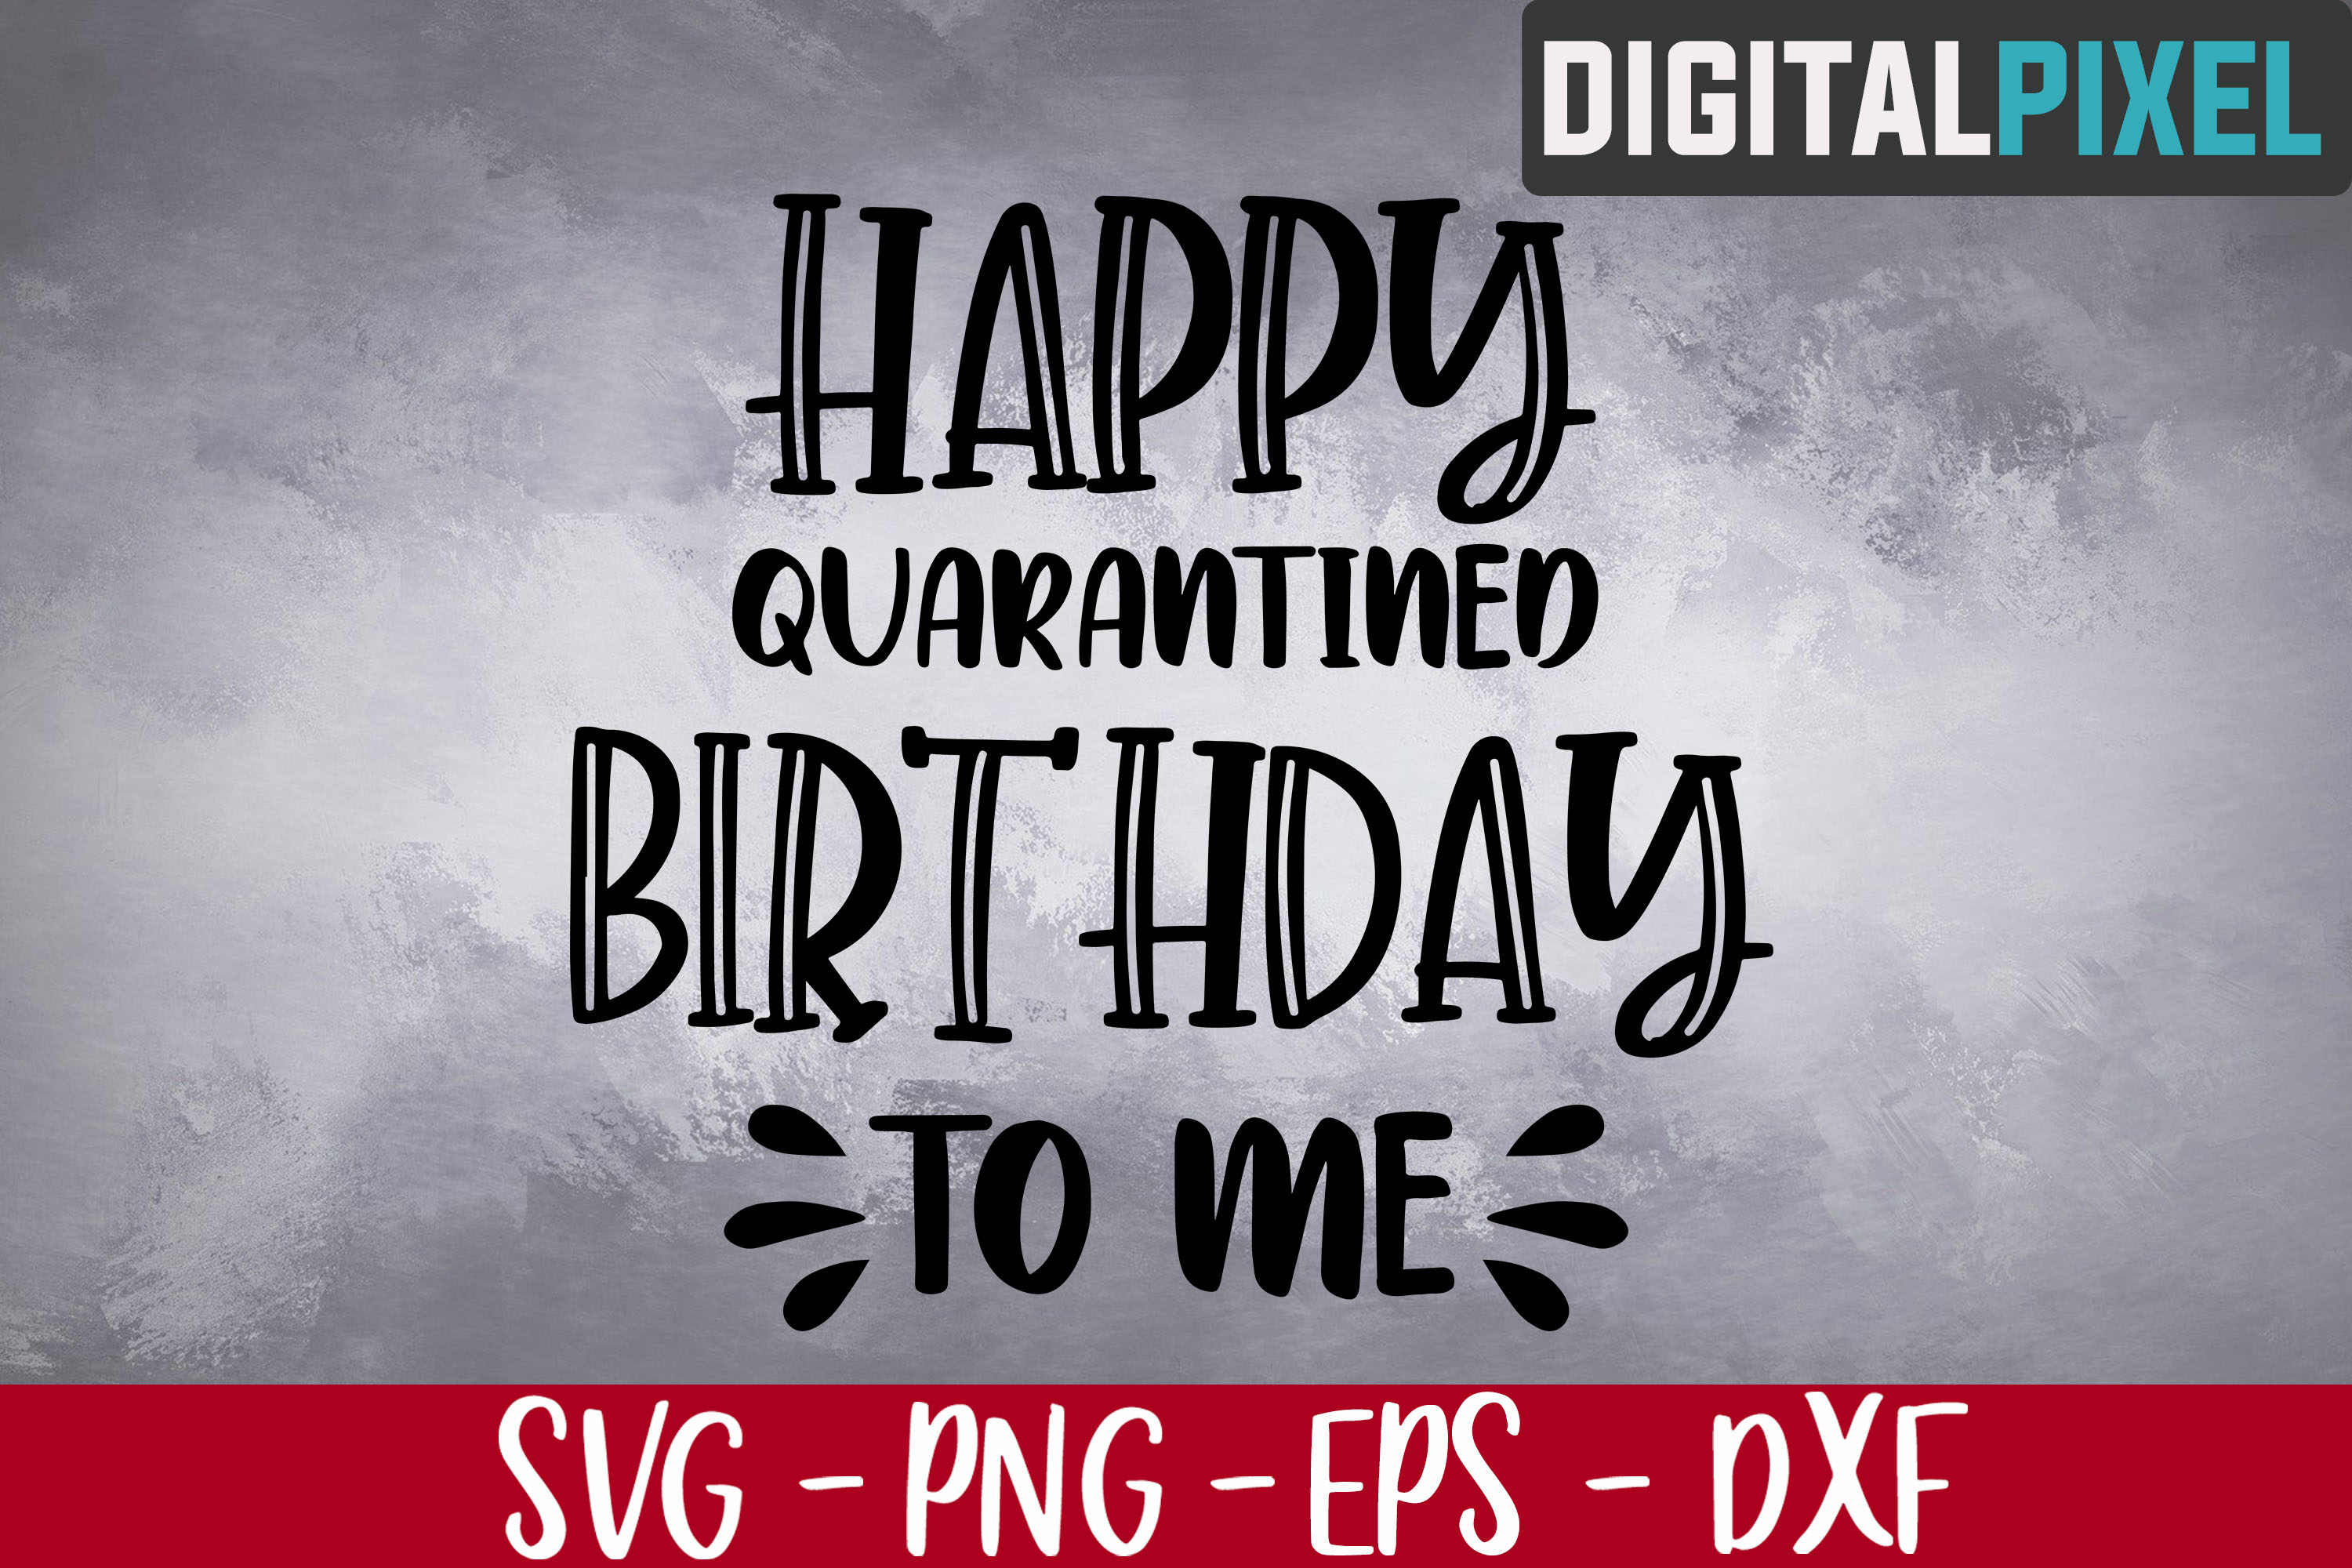 Download Happy Quarantined Birthday To Me SVG PNG DXF - Cutting Files